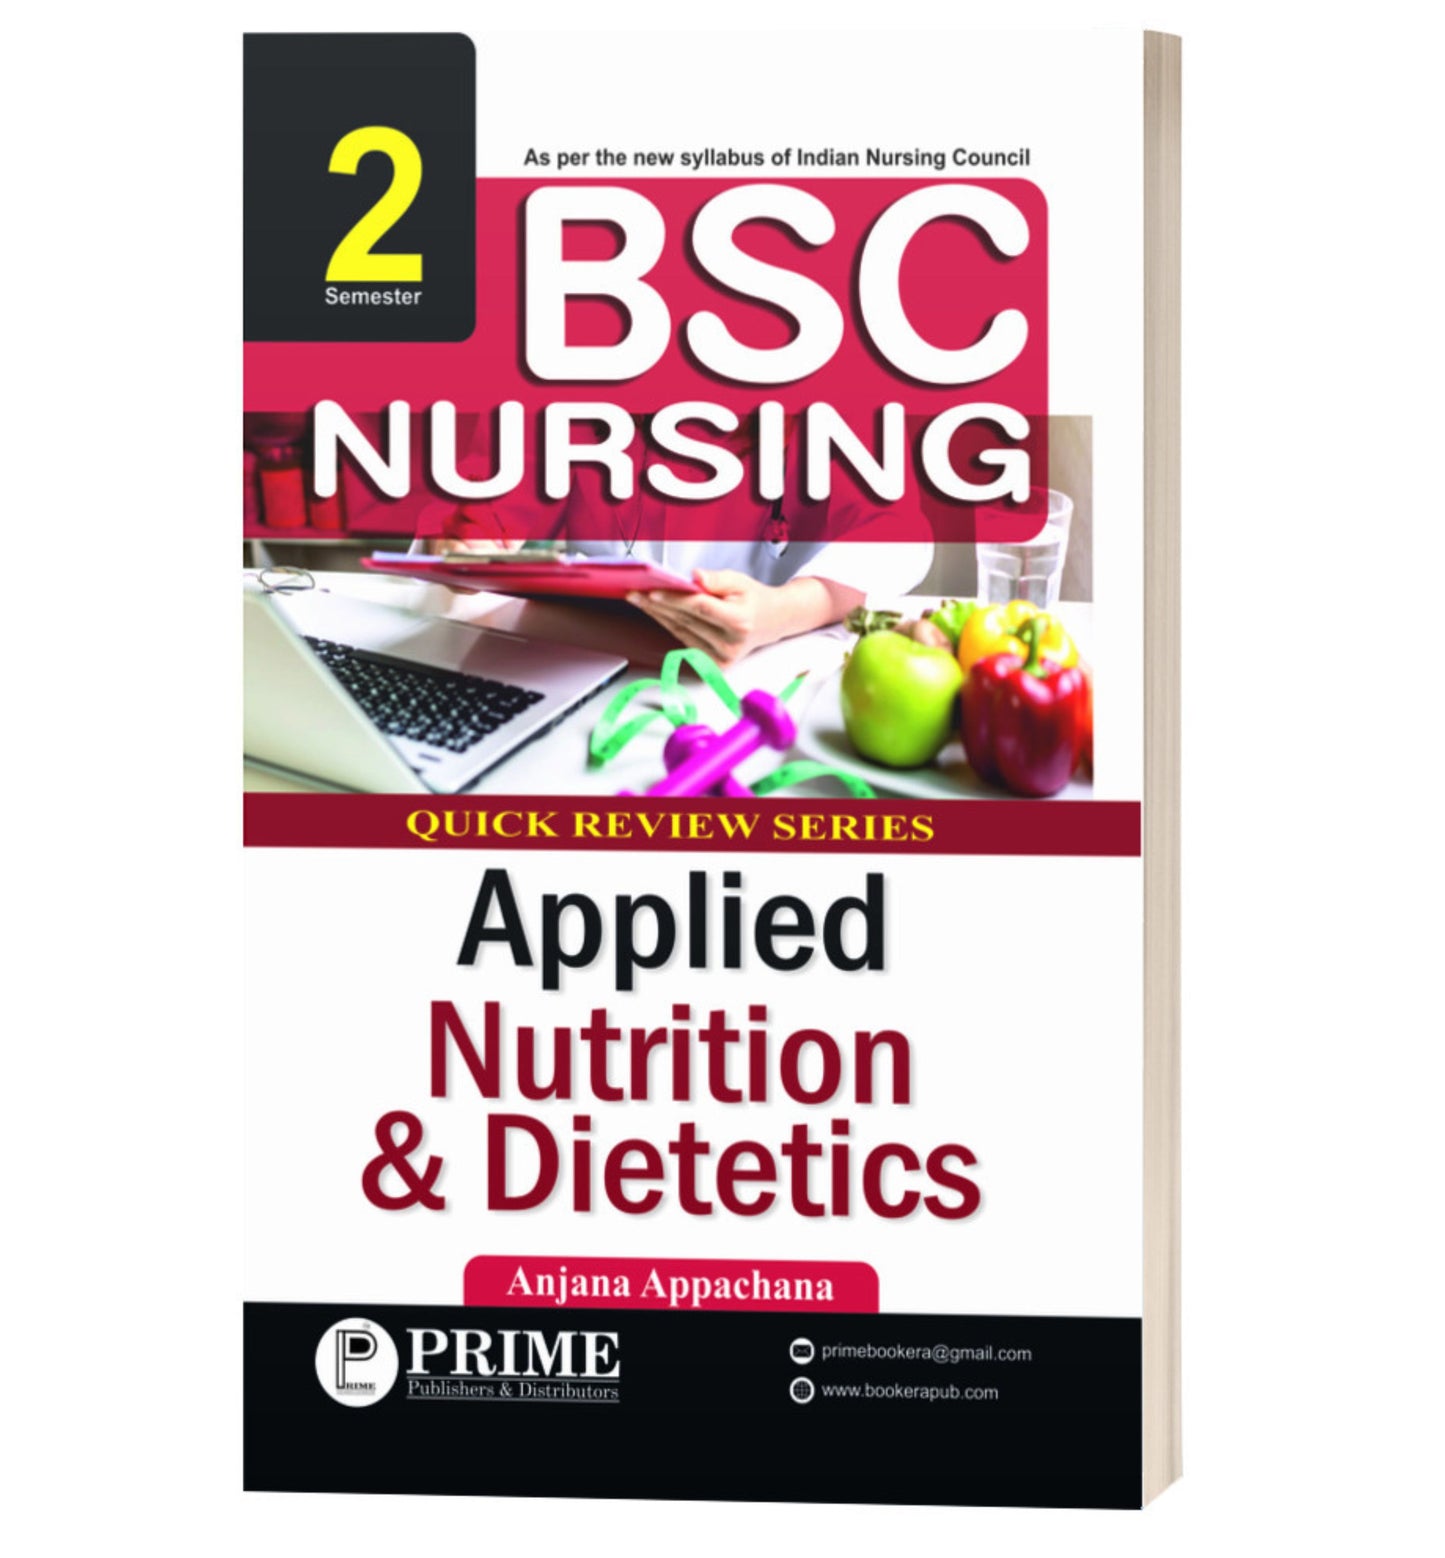 Quick Review Series of Applied Nutrition & Dietetics